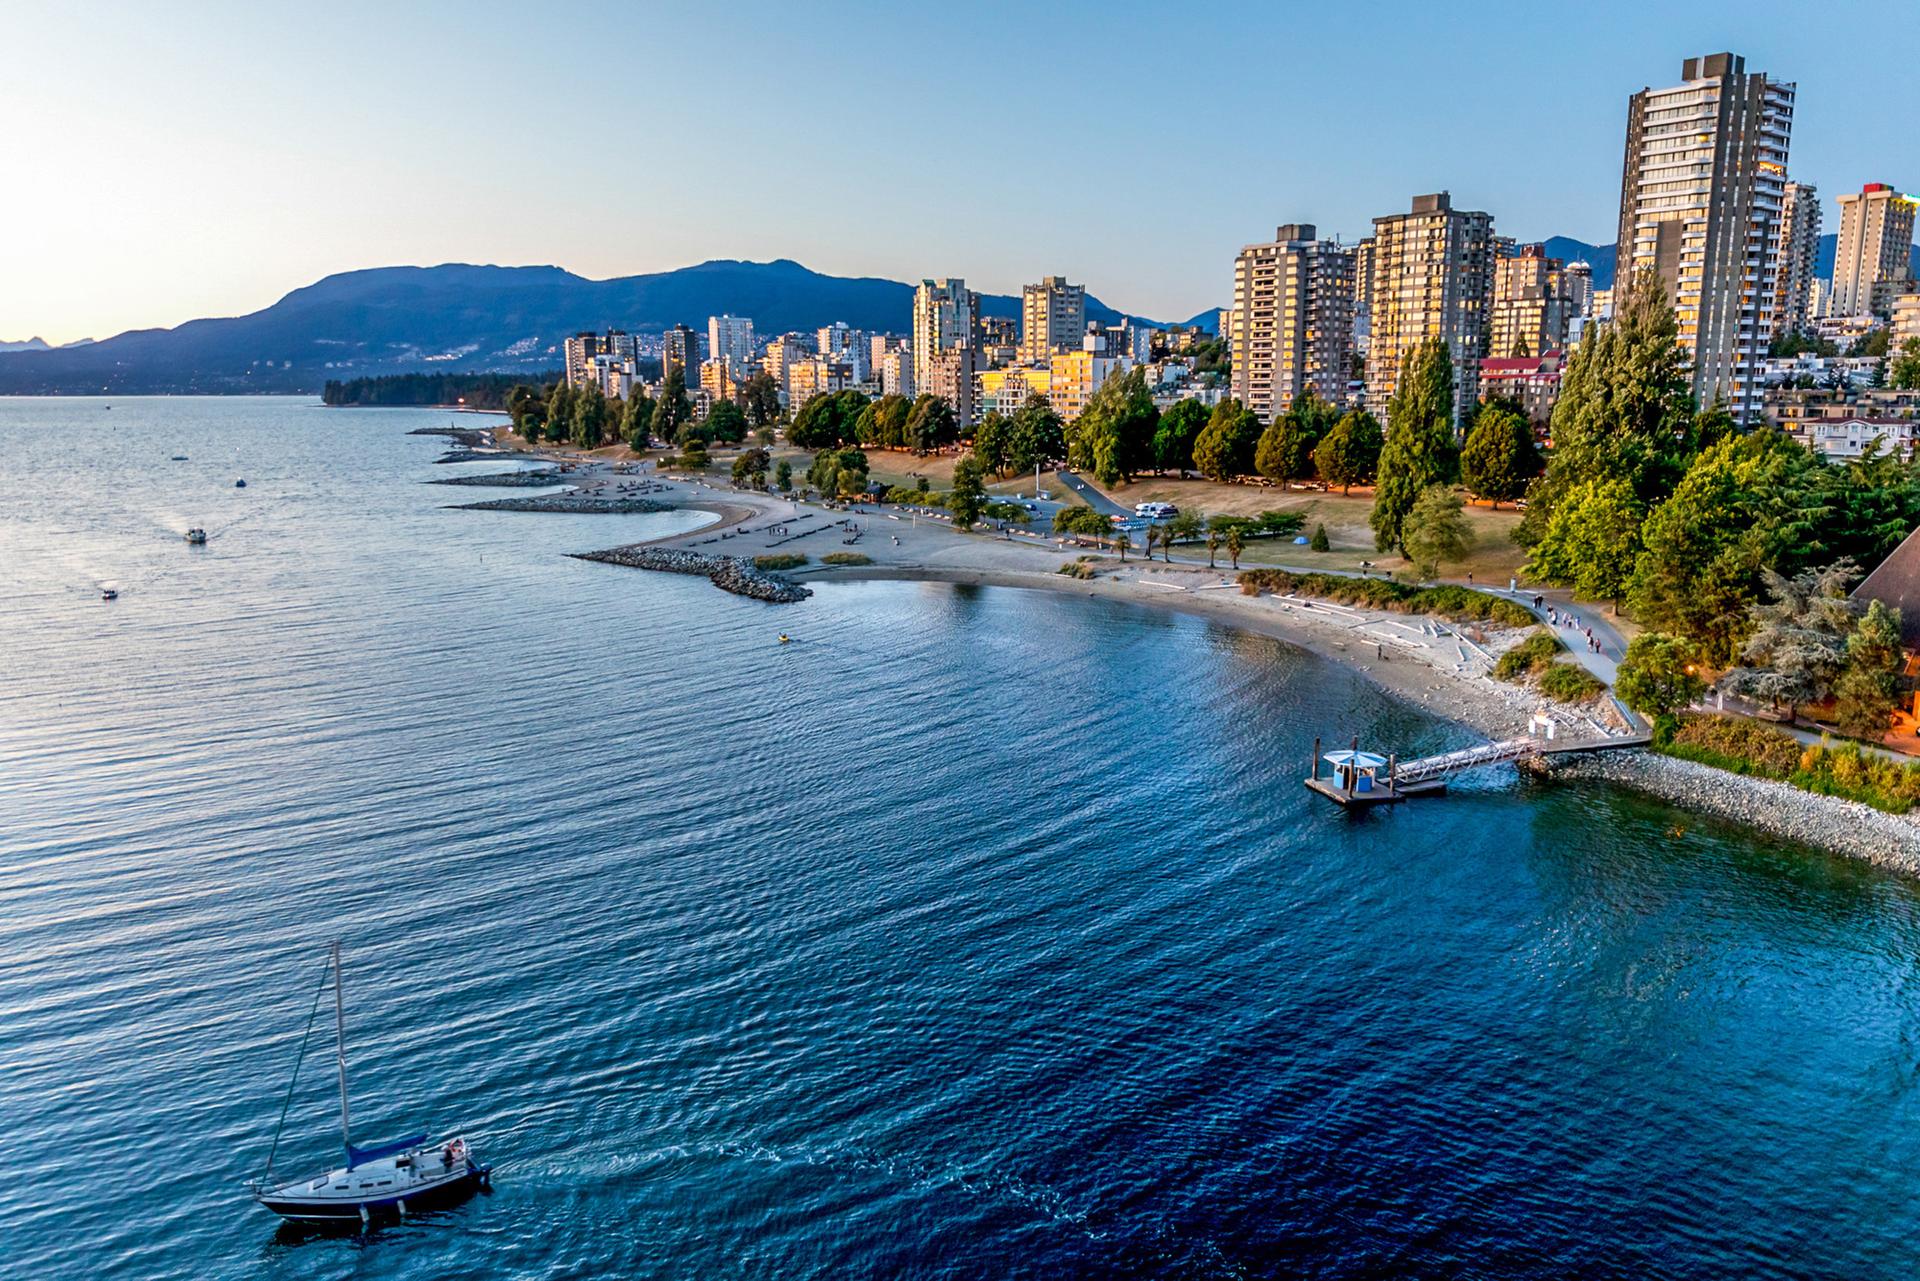 Plan your trip to Vancouver